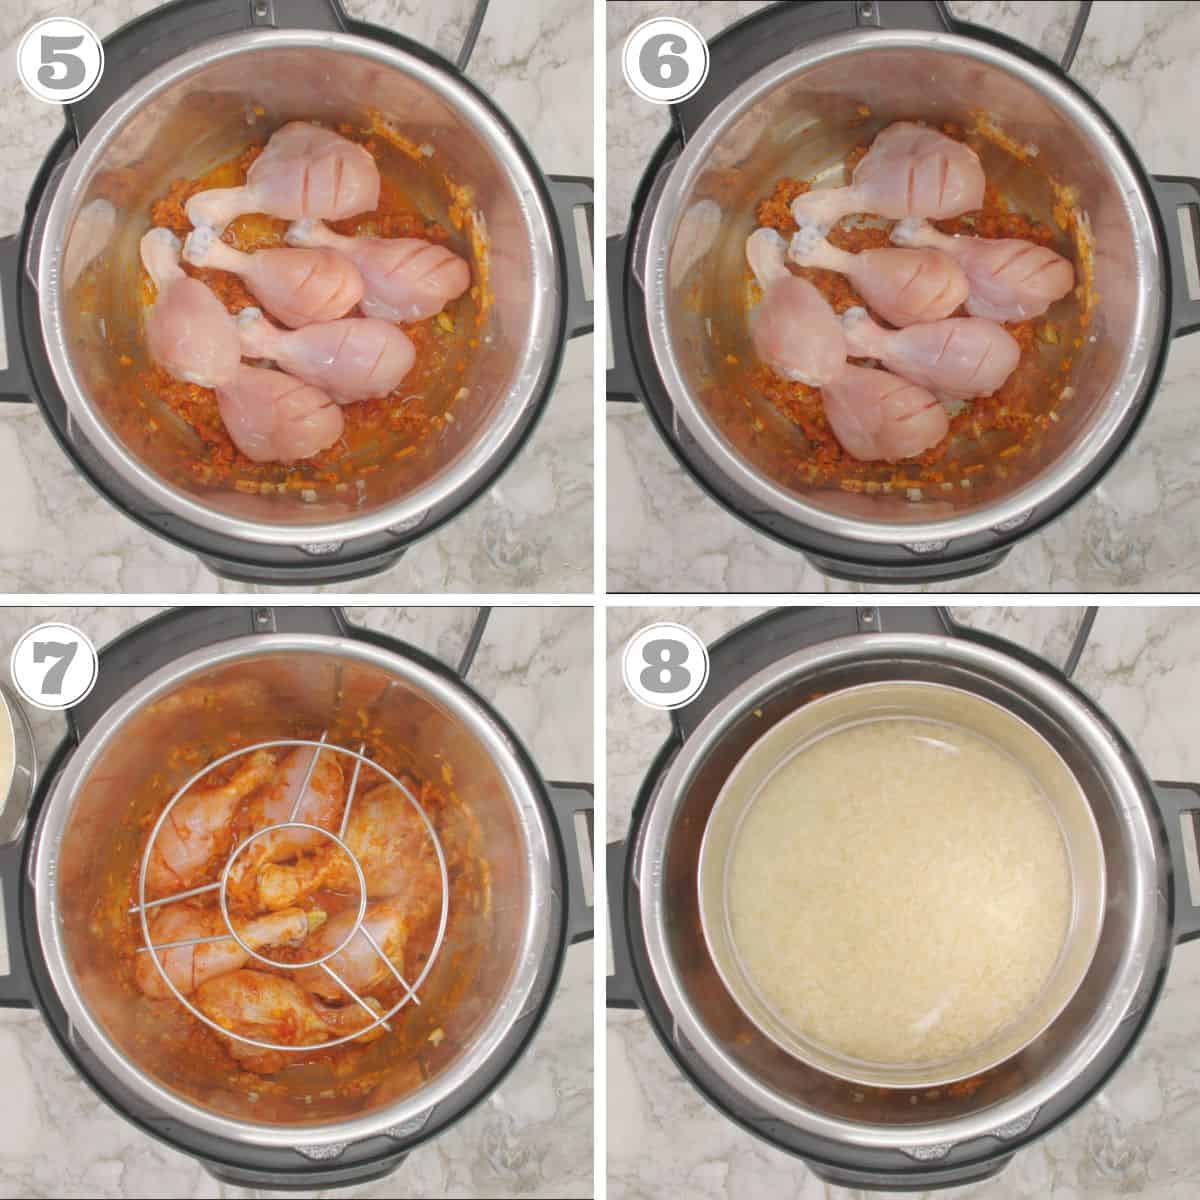 photos 5 through eight showing adding chicken to korma and how to make pot in pot rice 